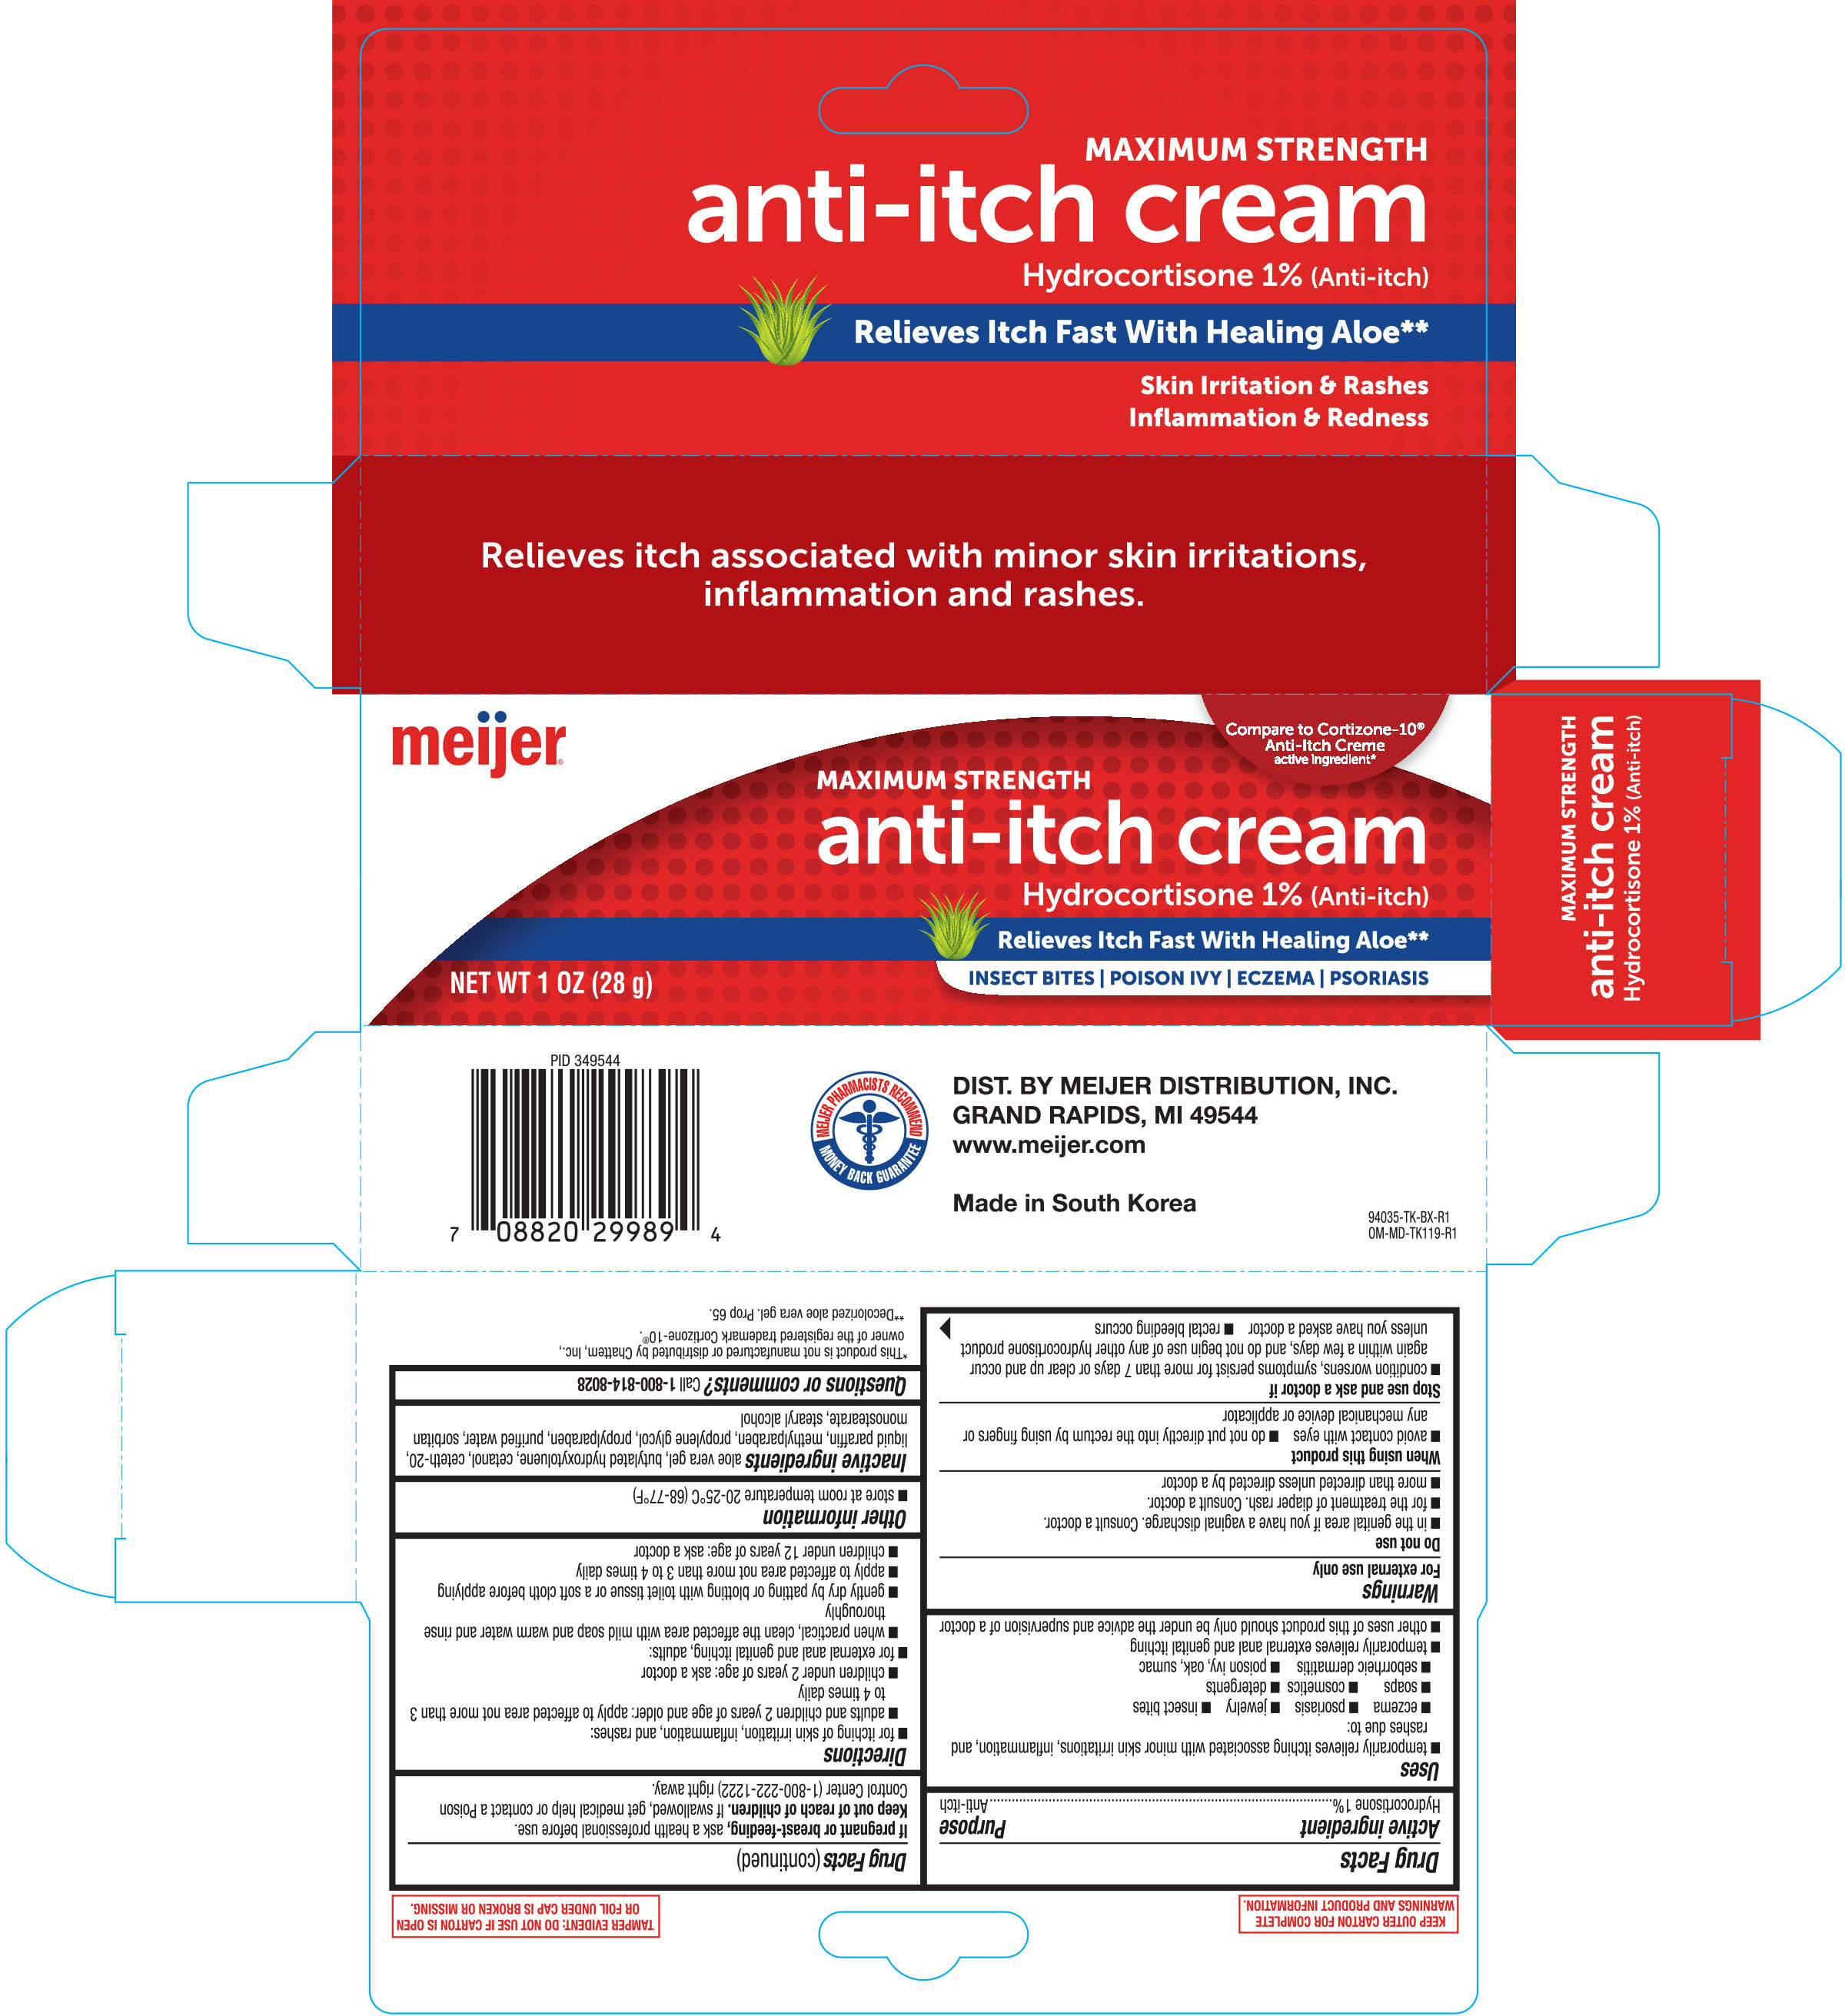 Anti-itch | Hydrocortisone Ointment while Breastfeeding